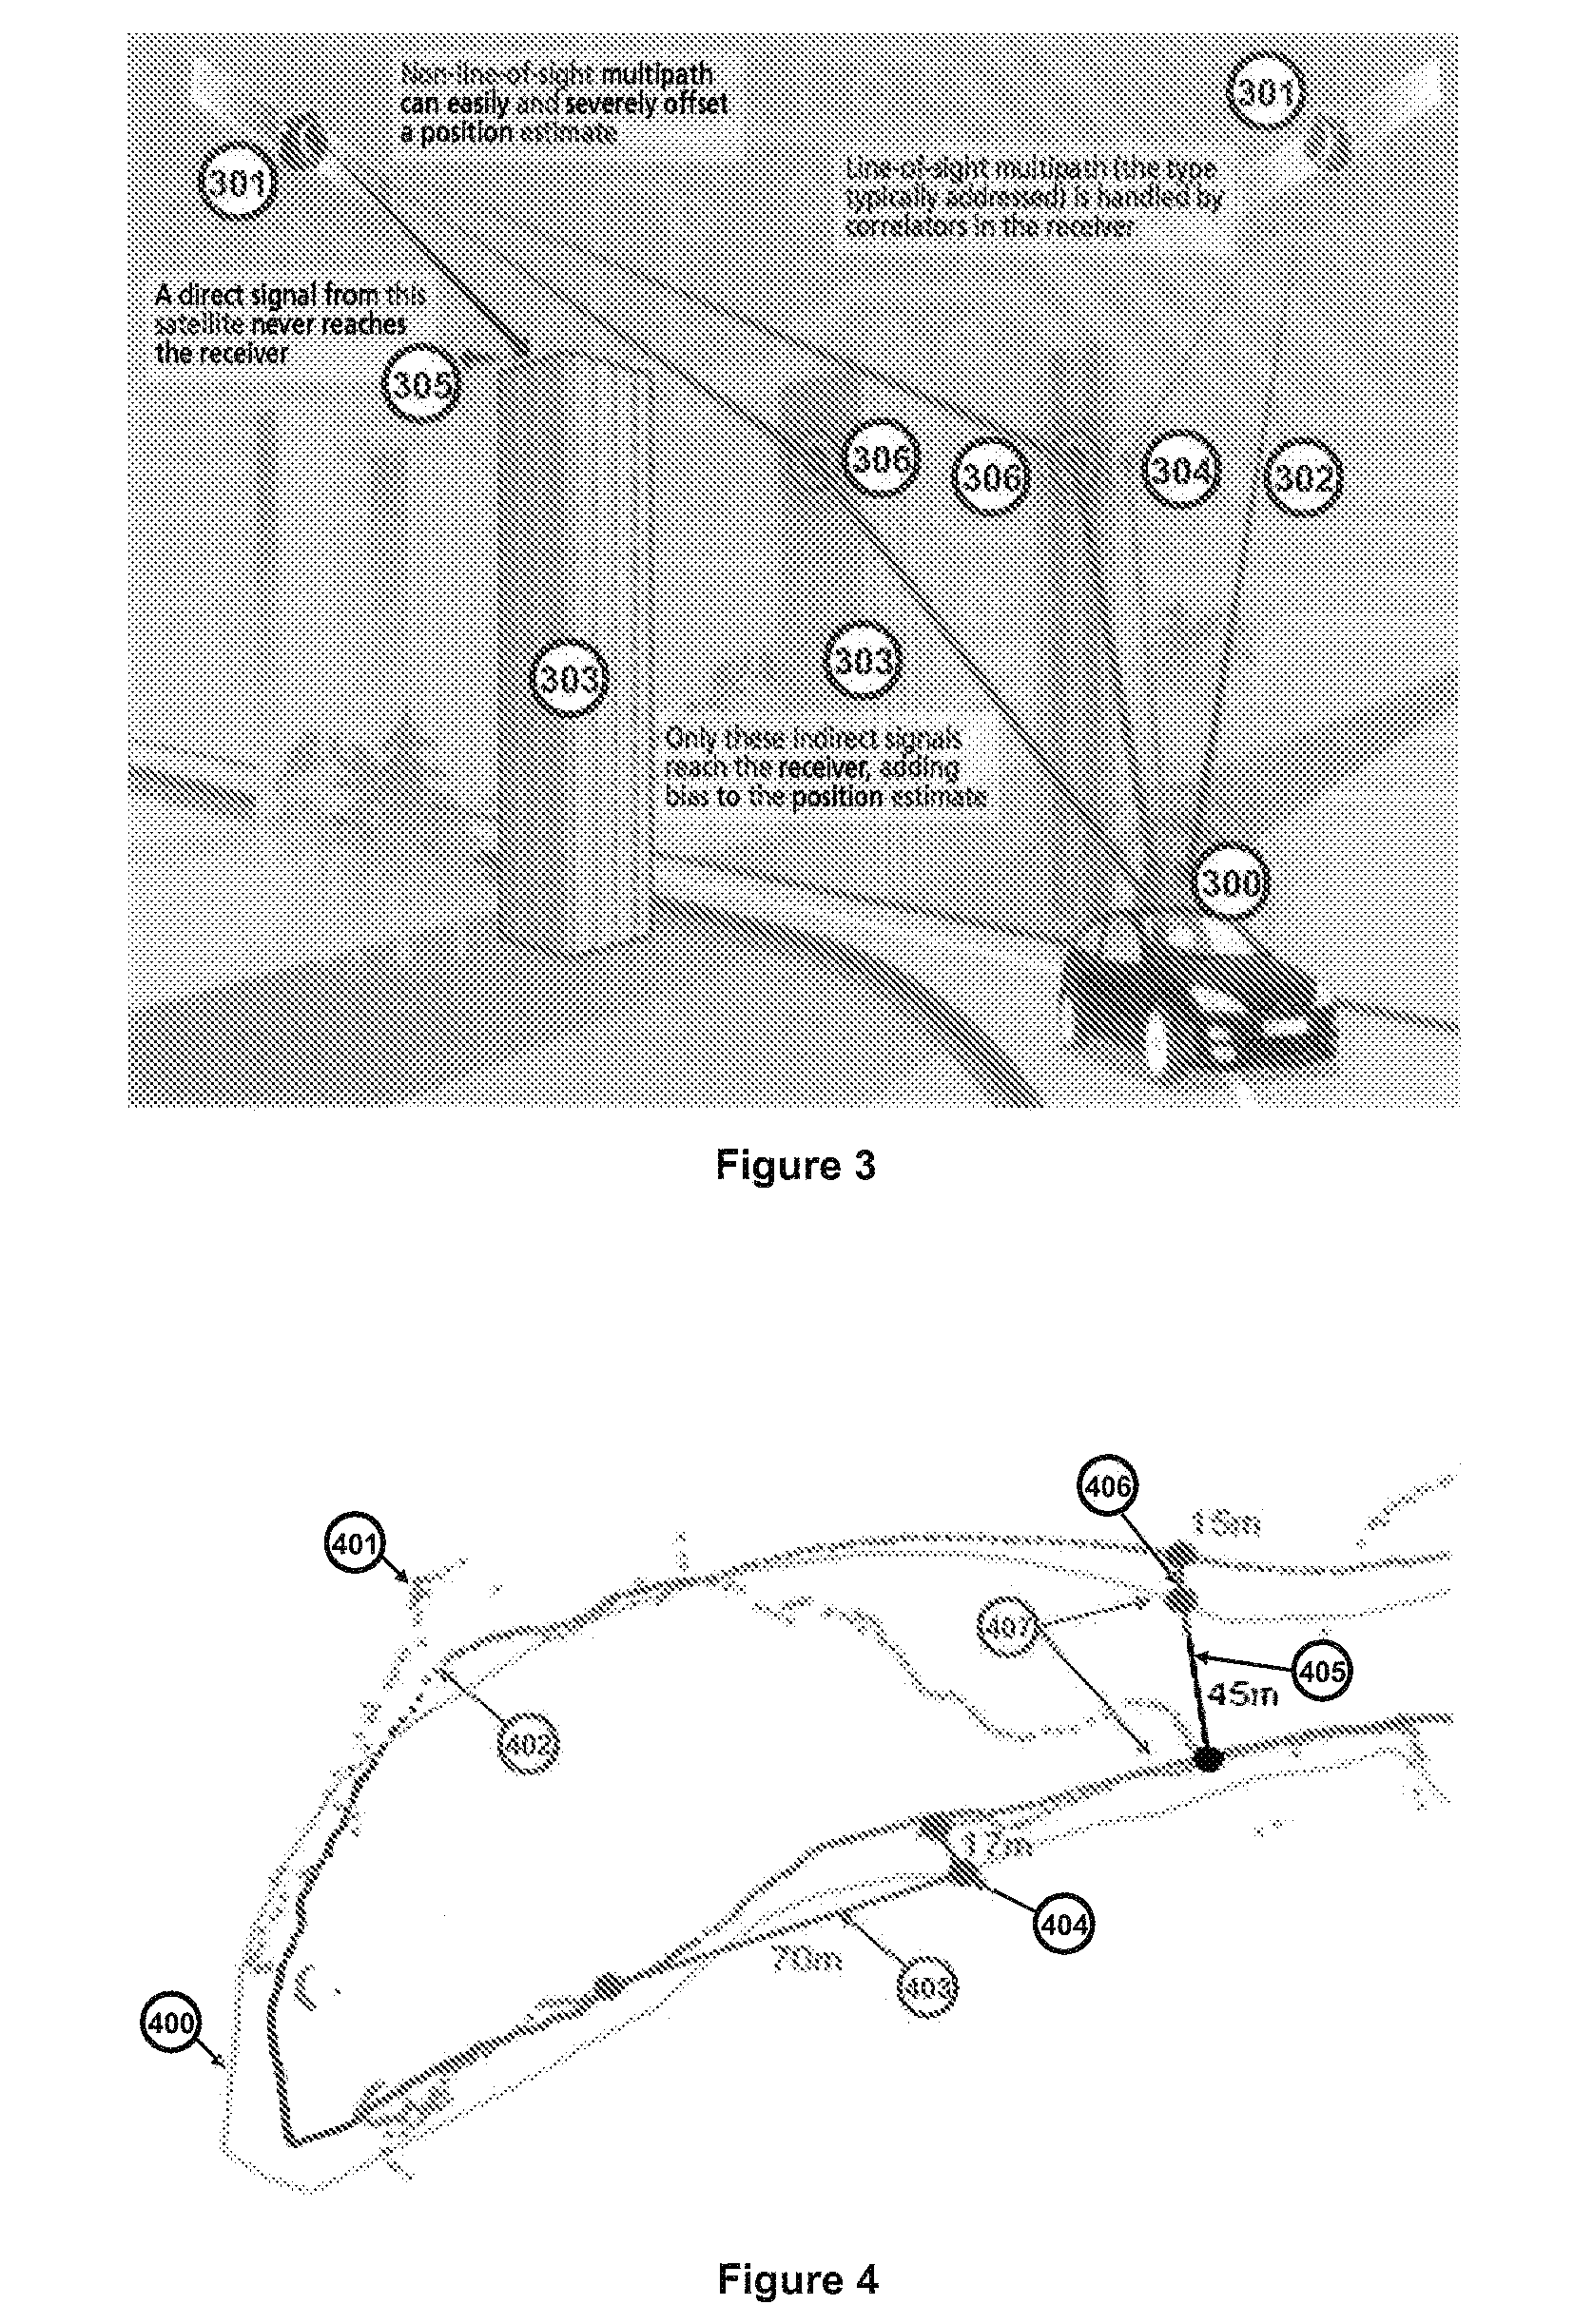 Private, auditable vehicle positioning system and on-board unit for same